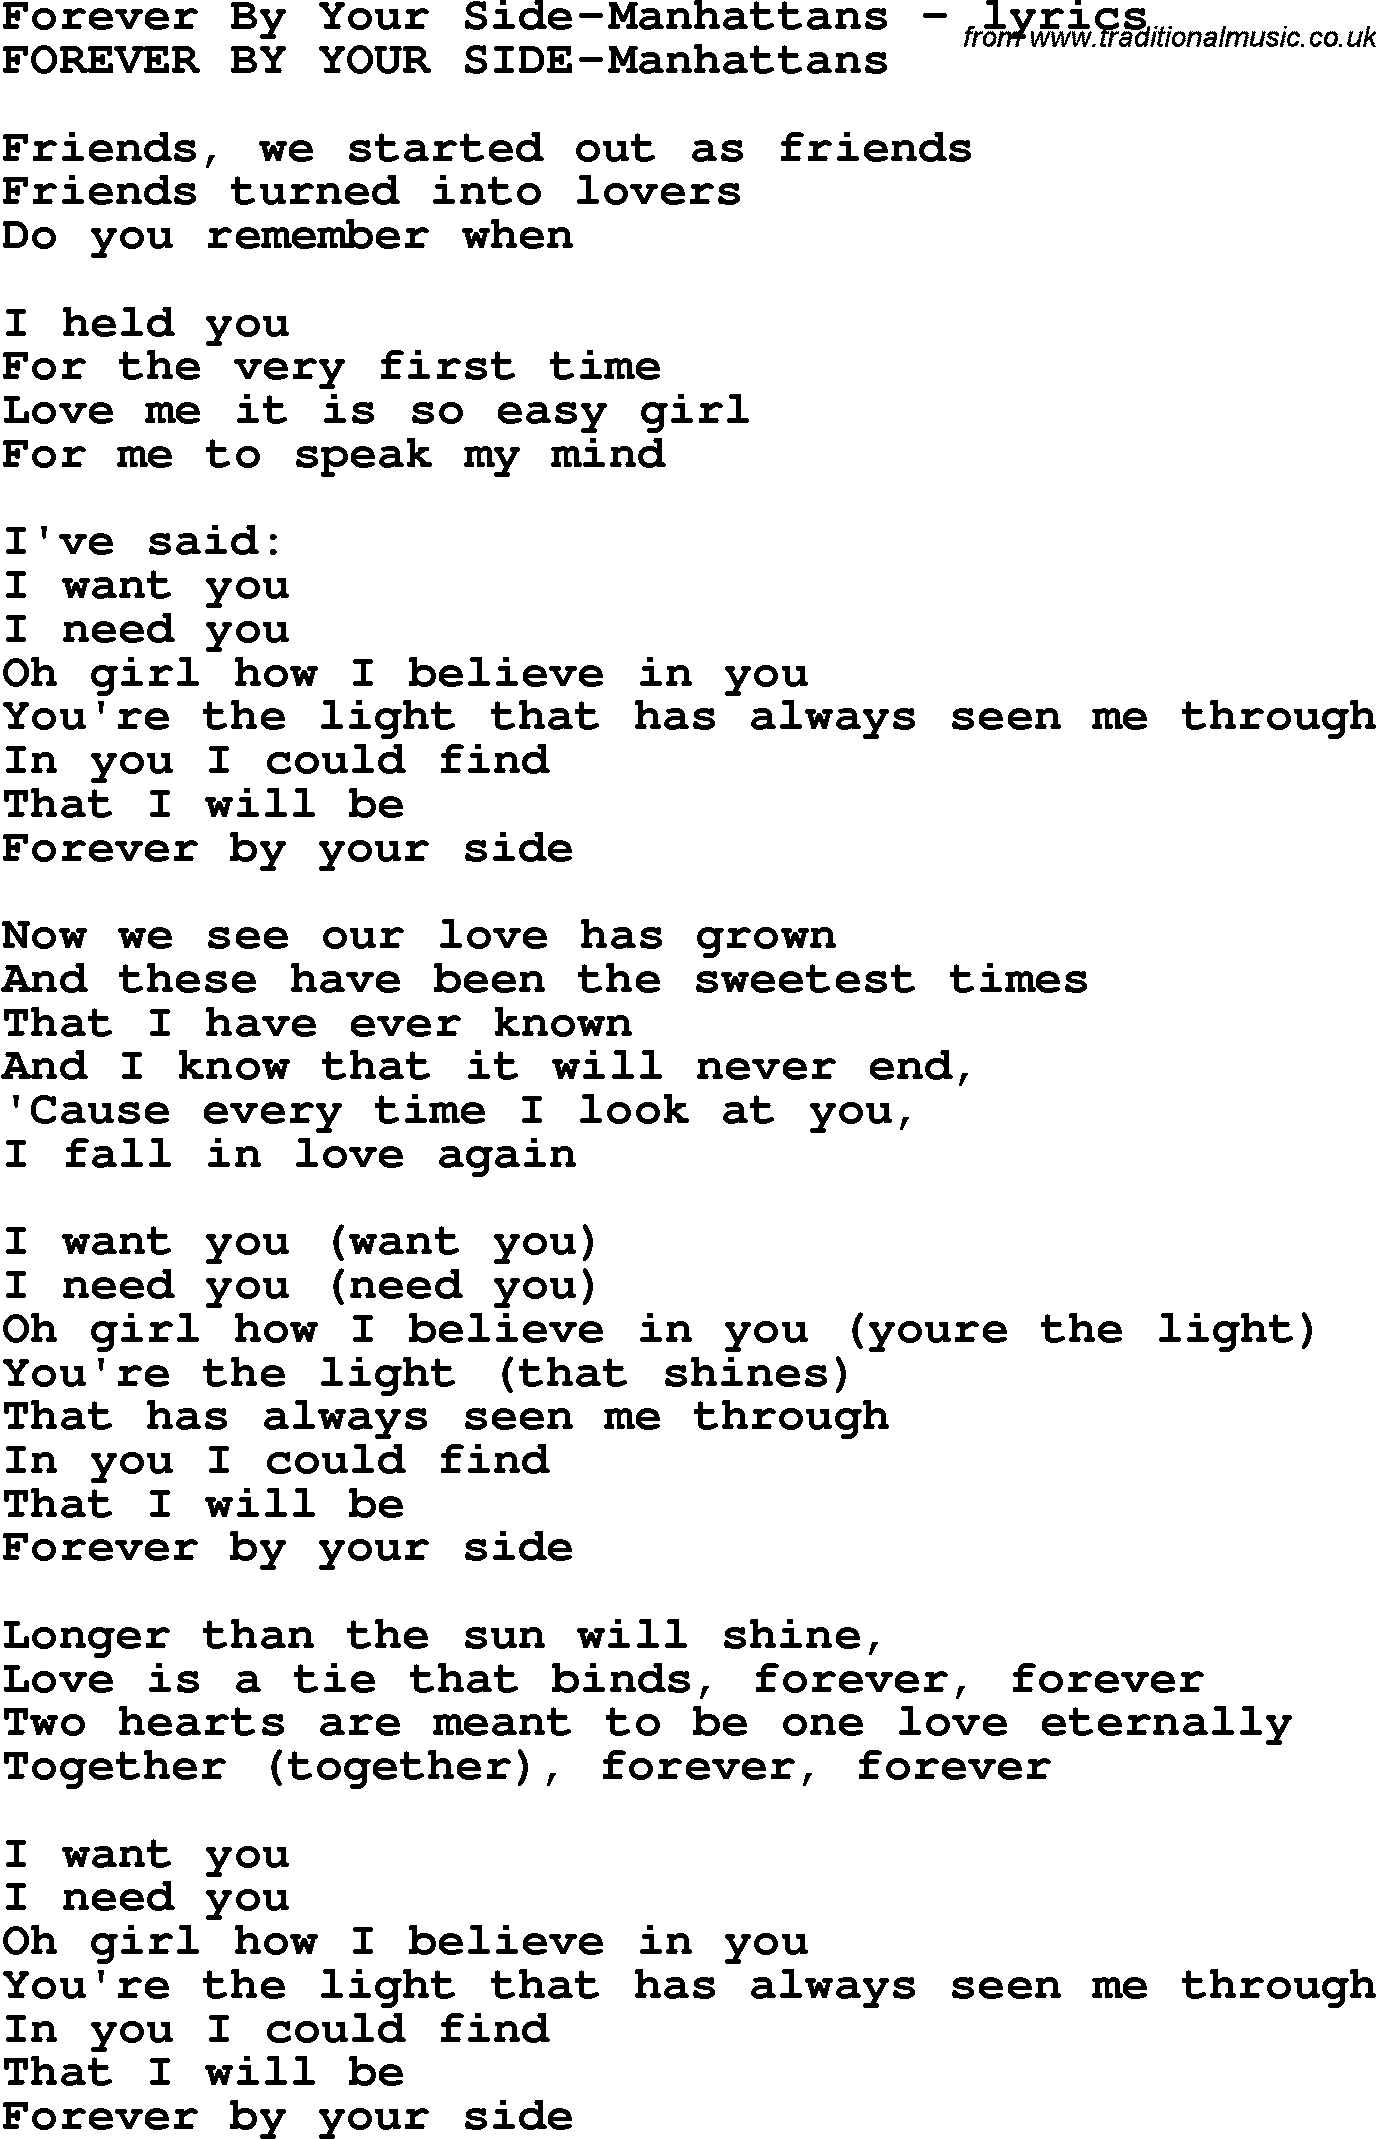 Love Song Lyrics for: Forever By Your Side-Manhattans